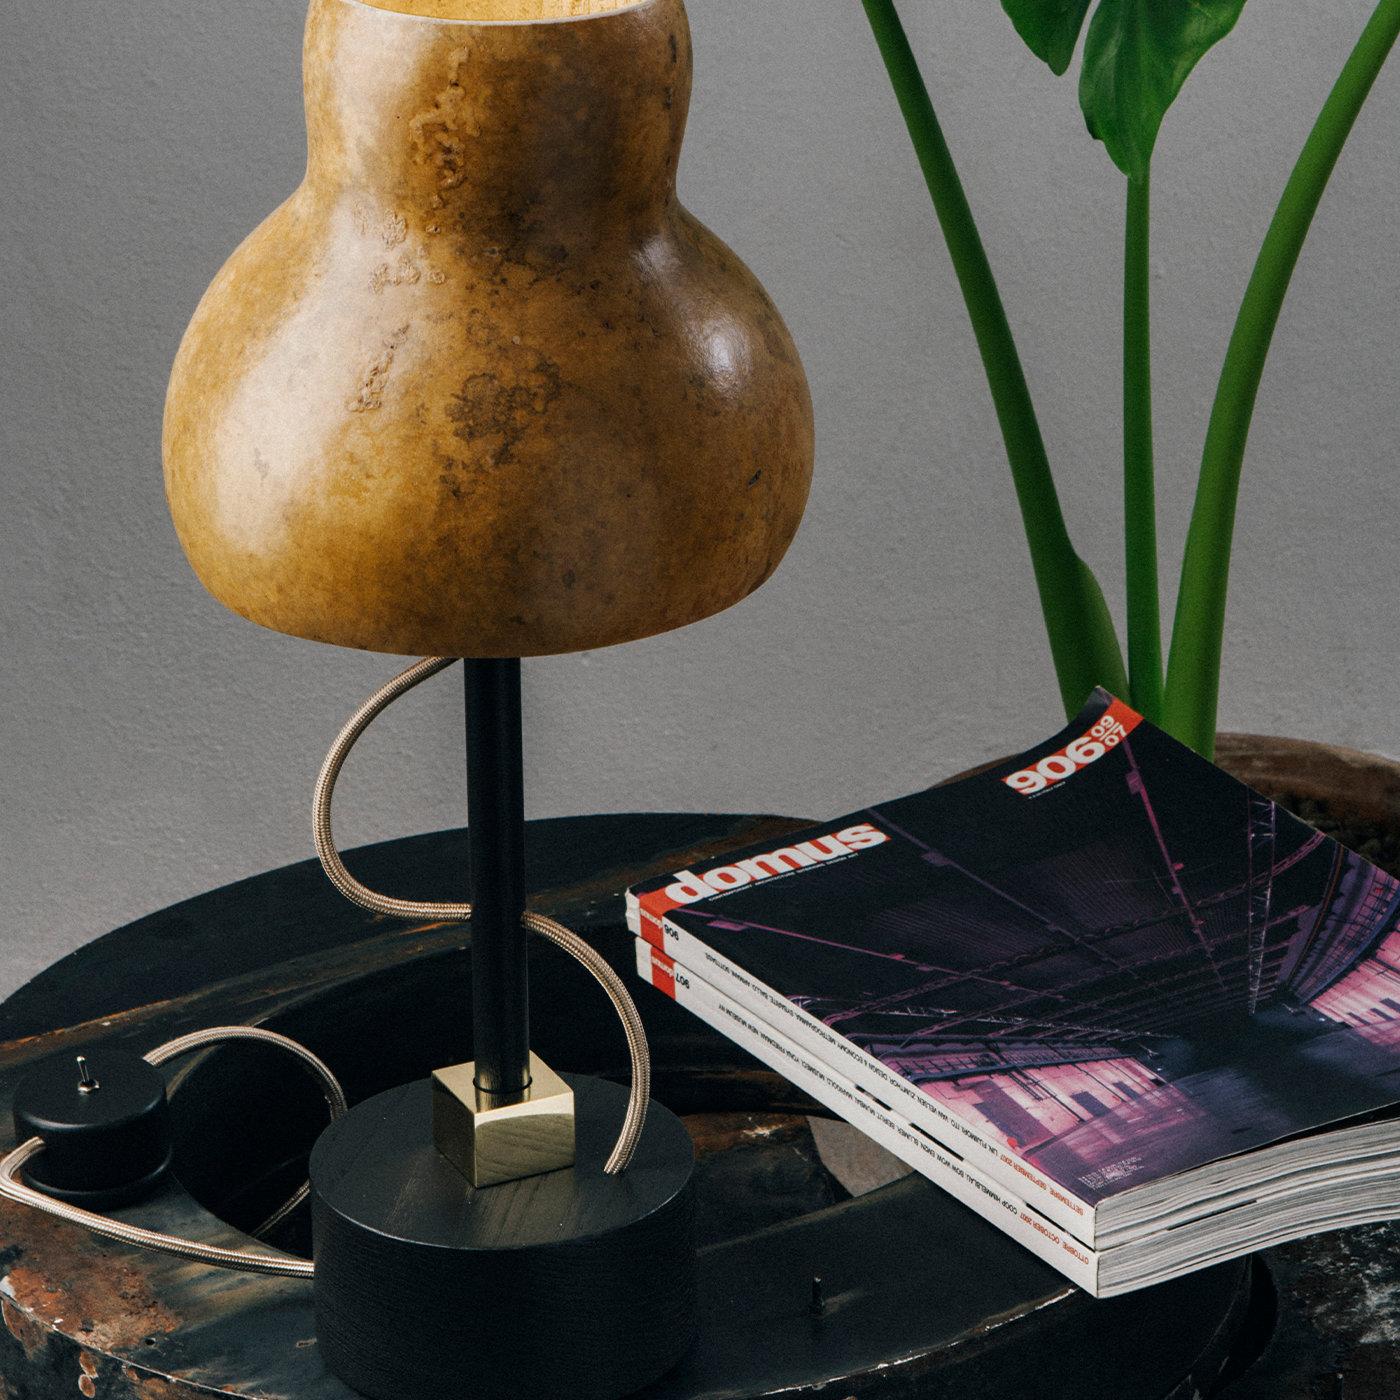 The desk lamp refers to the animal and plant world. The lampshade in Lagenaria dried gourd with its unique veining, together with the rounded ash bas, brings to mind a typical inhabitant of the undergrowth. The colored fabric cable, which passes